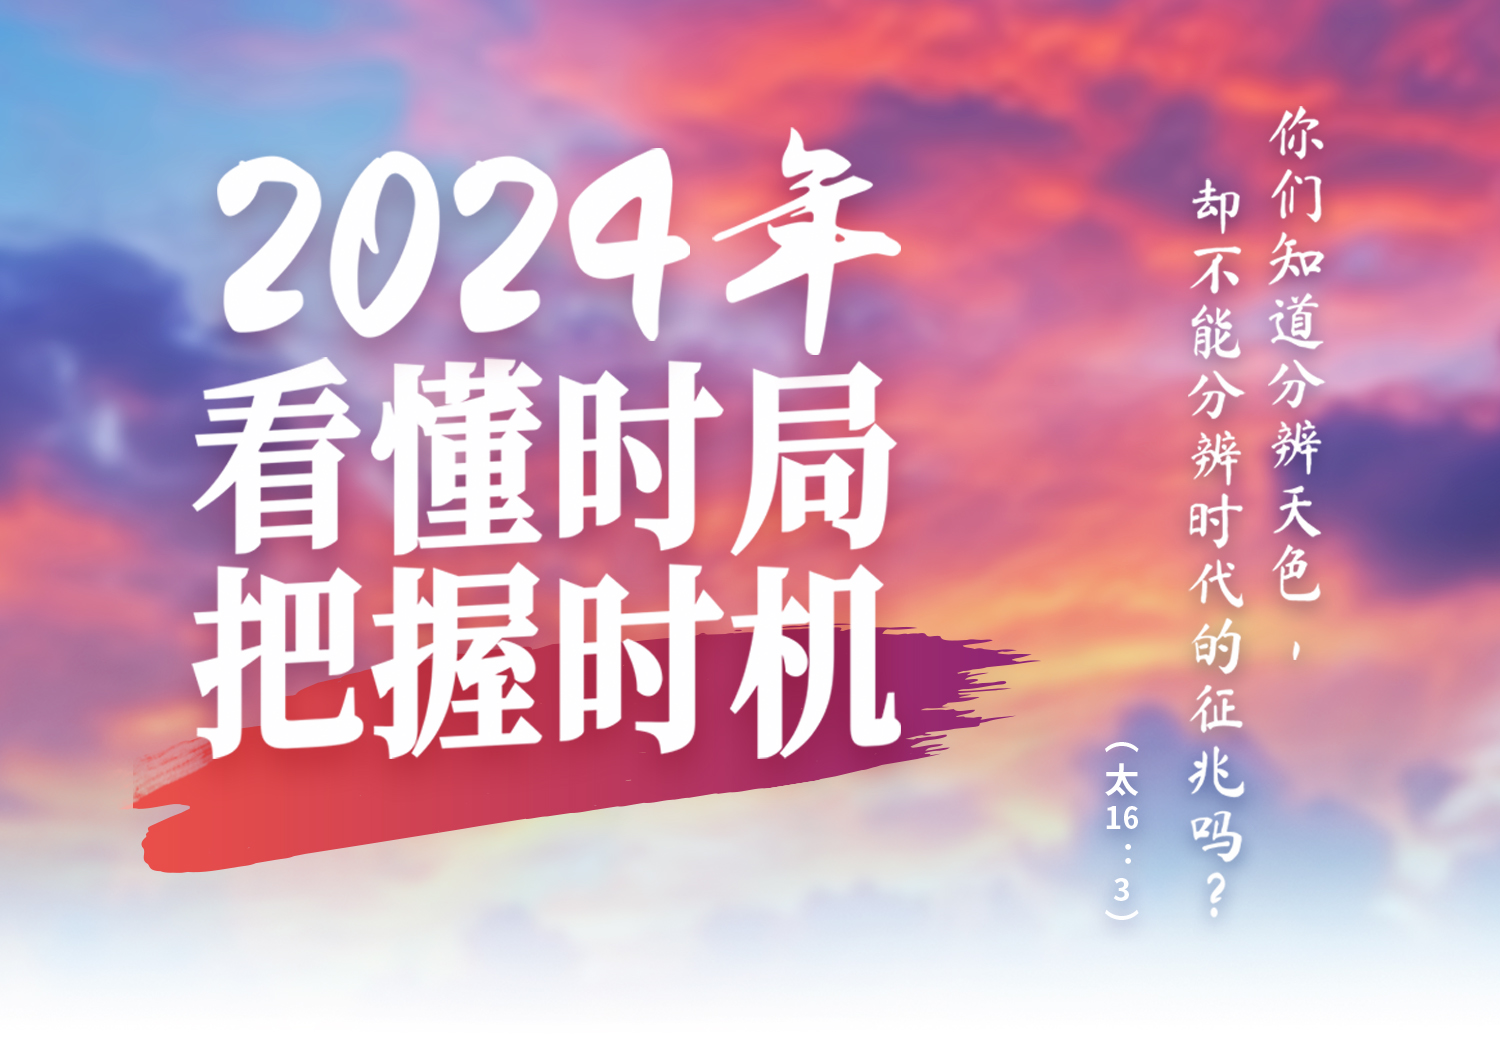 <strong>2024年看懂时局、把握时机</strong><br><small>私房菜访谈系列</small>